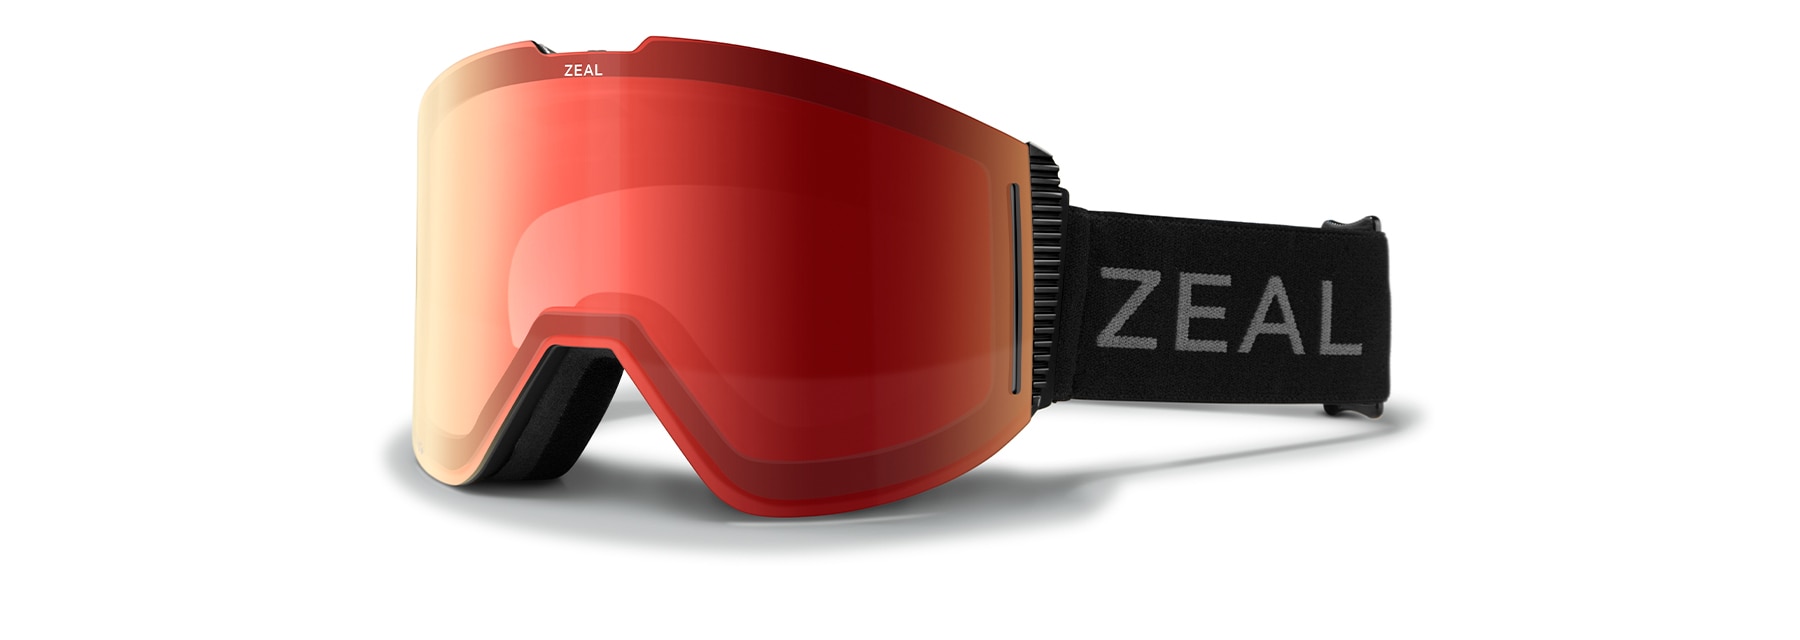 Shop LOOKOUT (Z1867) Goggles by Zeal | Zeal Optics